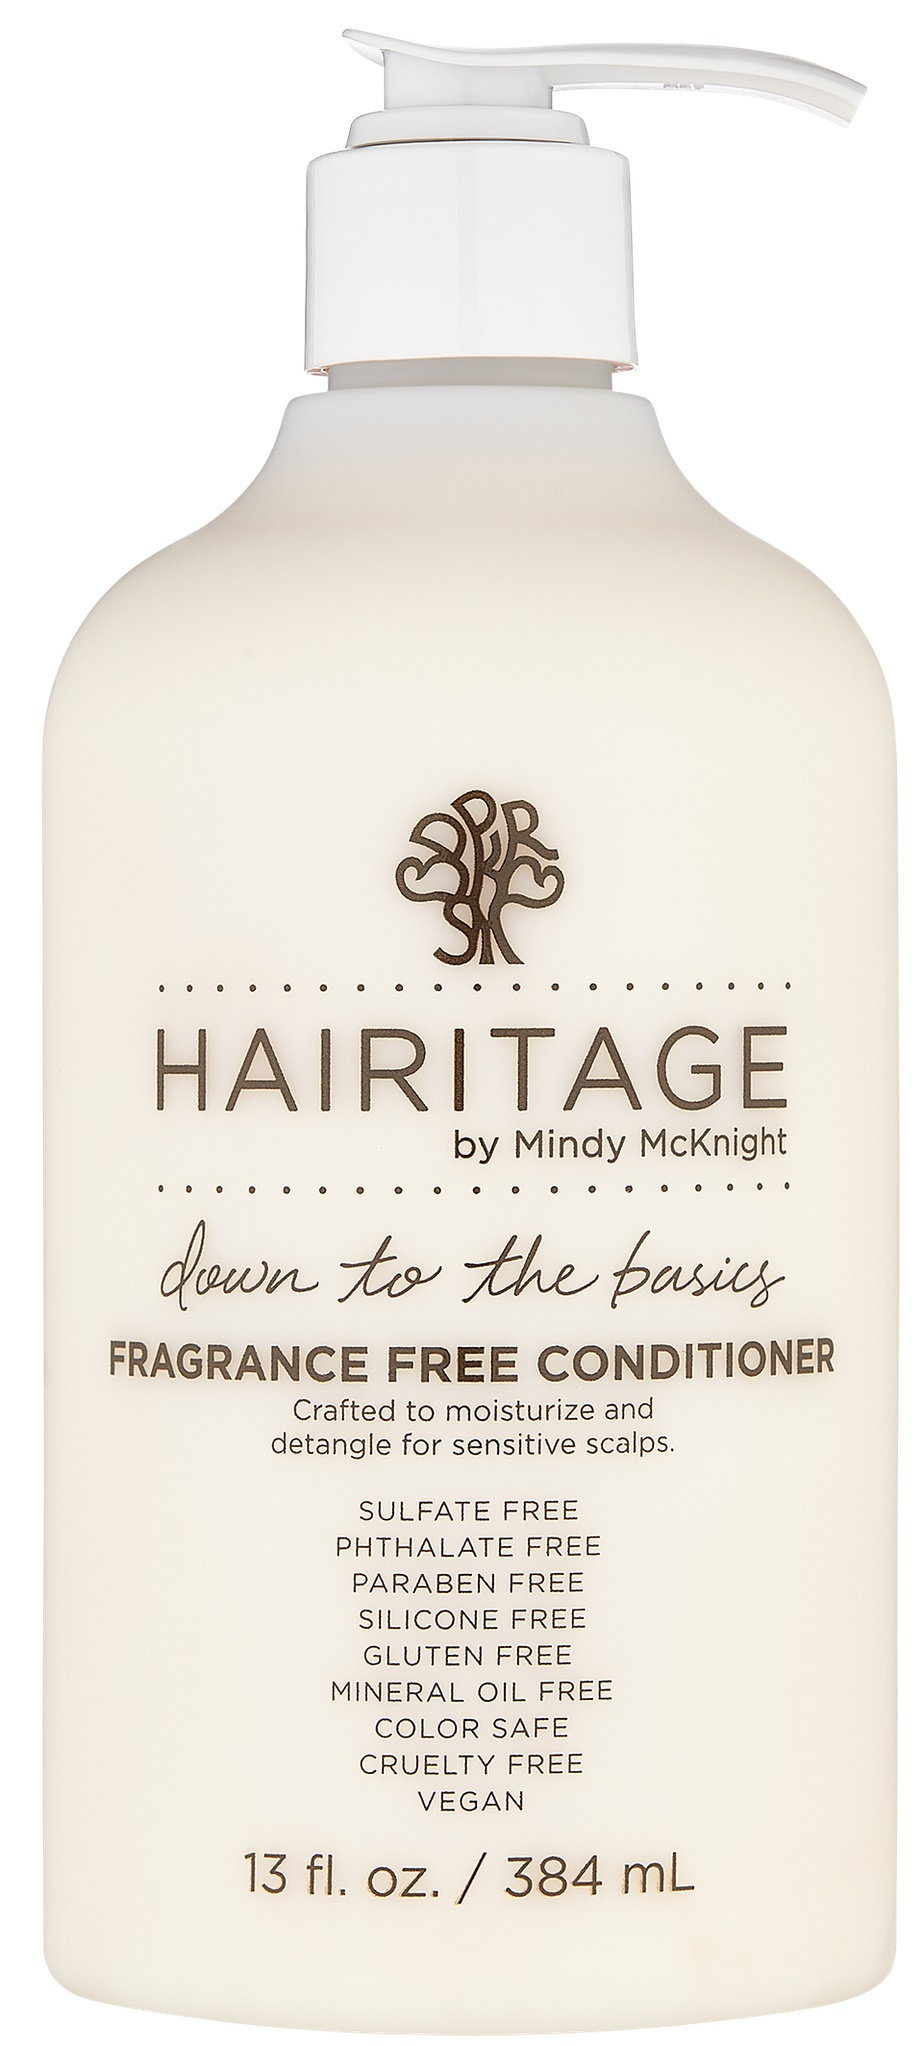 Hairitage by Mindy McKnight! Down To The Basics Fragrance Free Conditioner